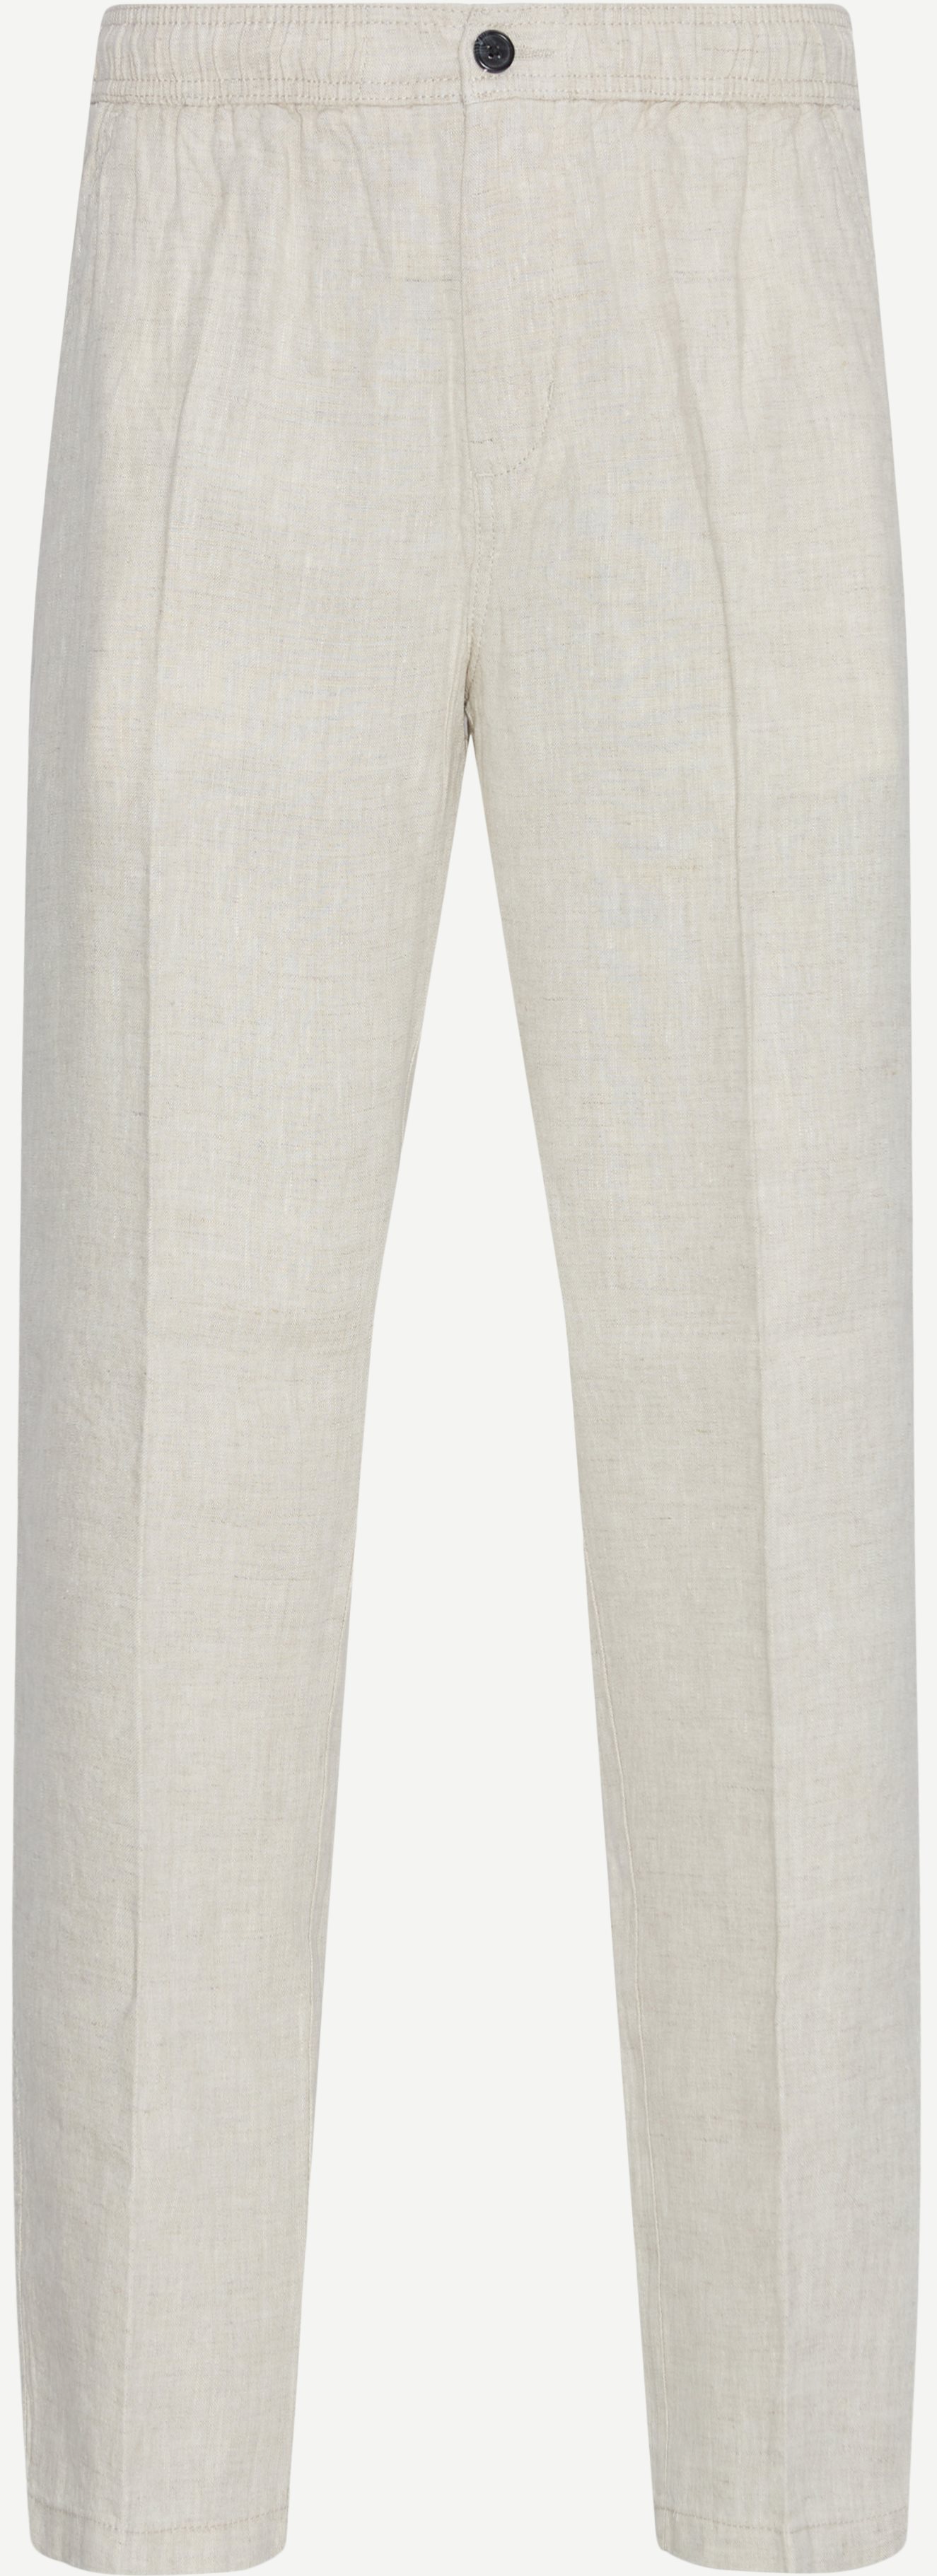 ICELAND Trousers BANDERAS Sand